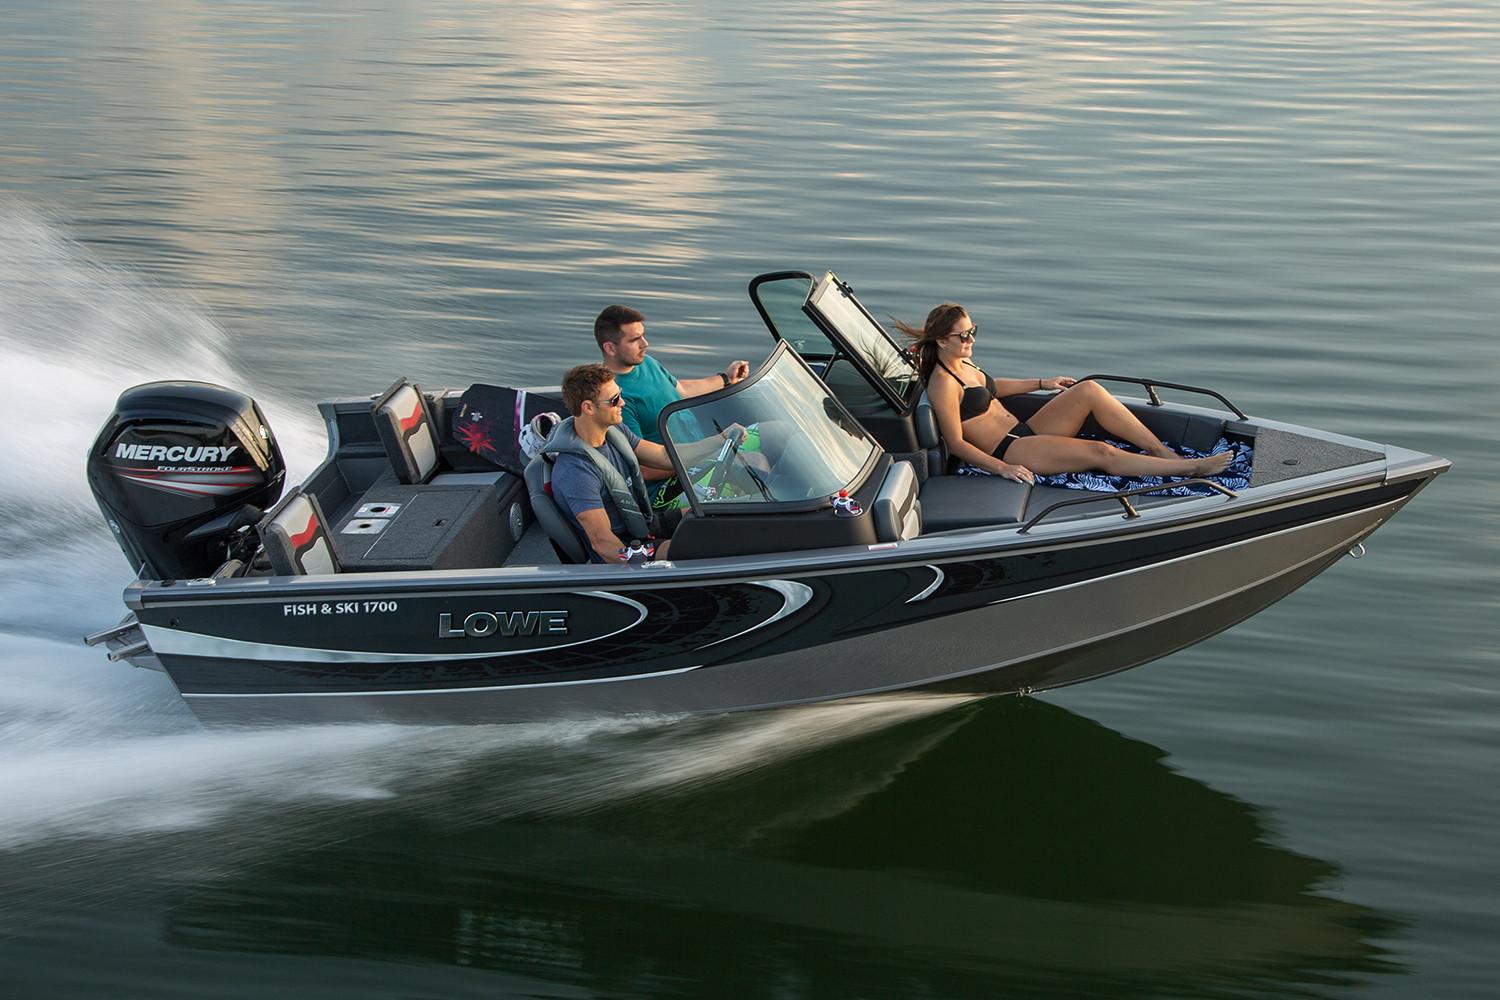 New 2019 Lowe Fish & Ski FS1700 Power Boats Outboard in